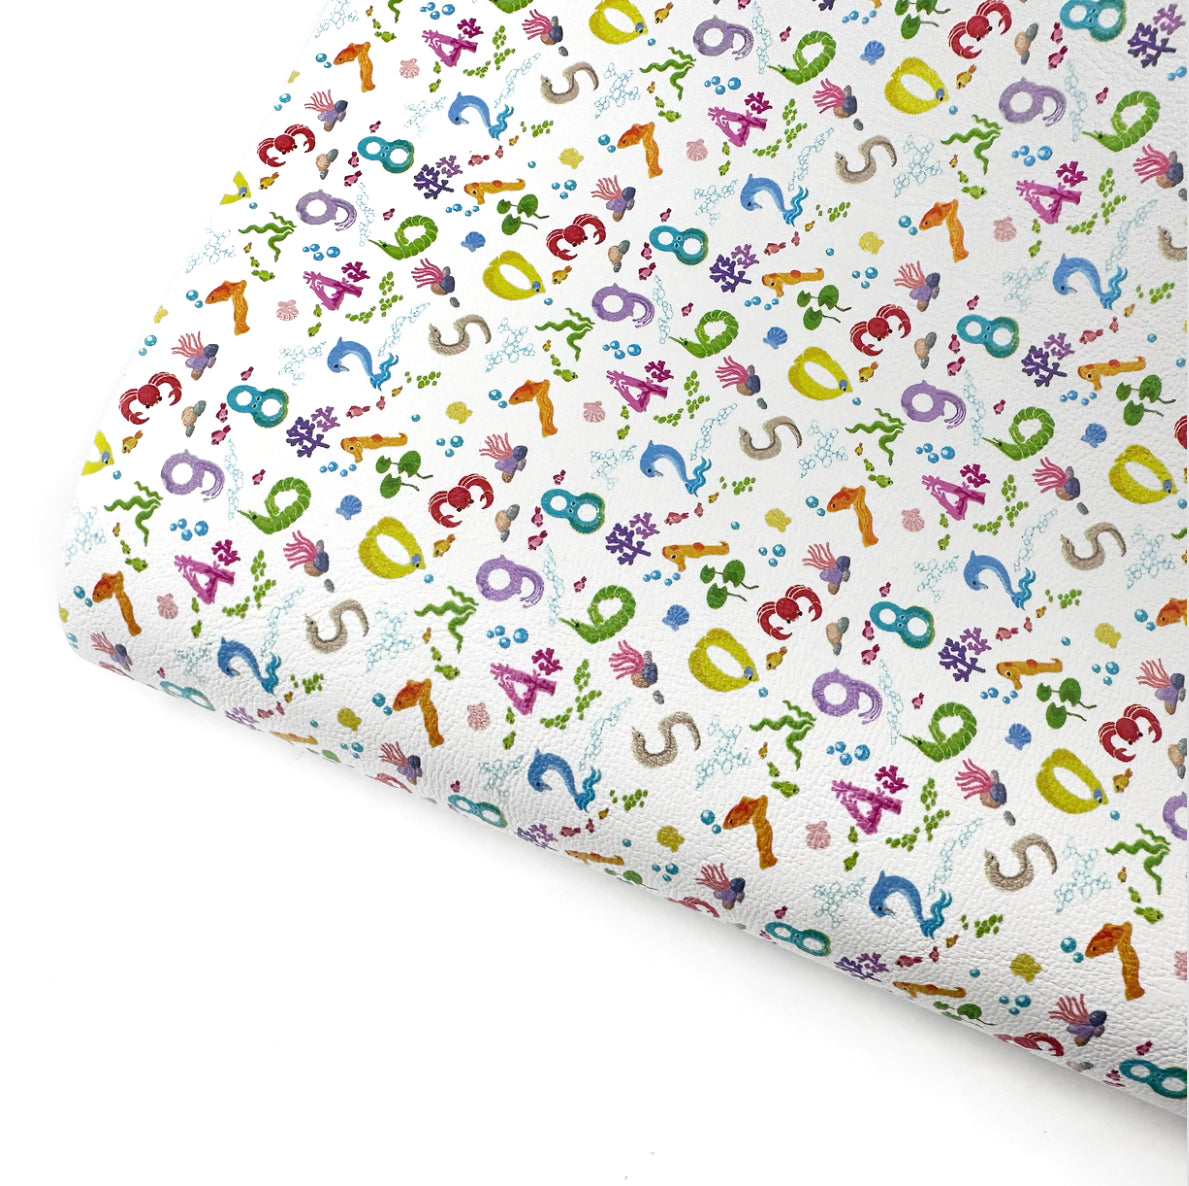 Under the Sea Numbers Premium Faux Leather Fabric Sheets